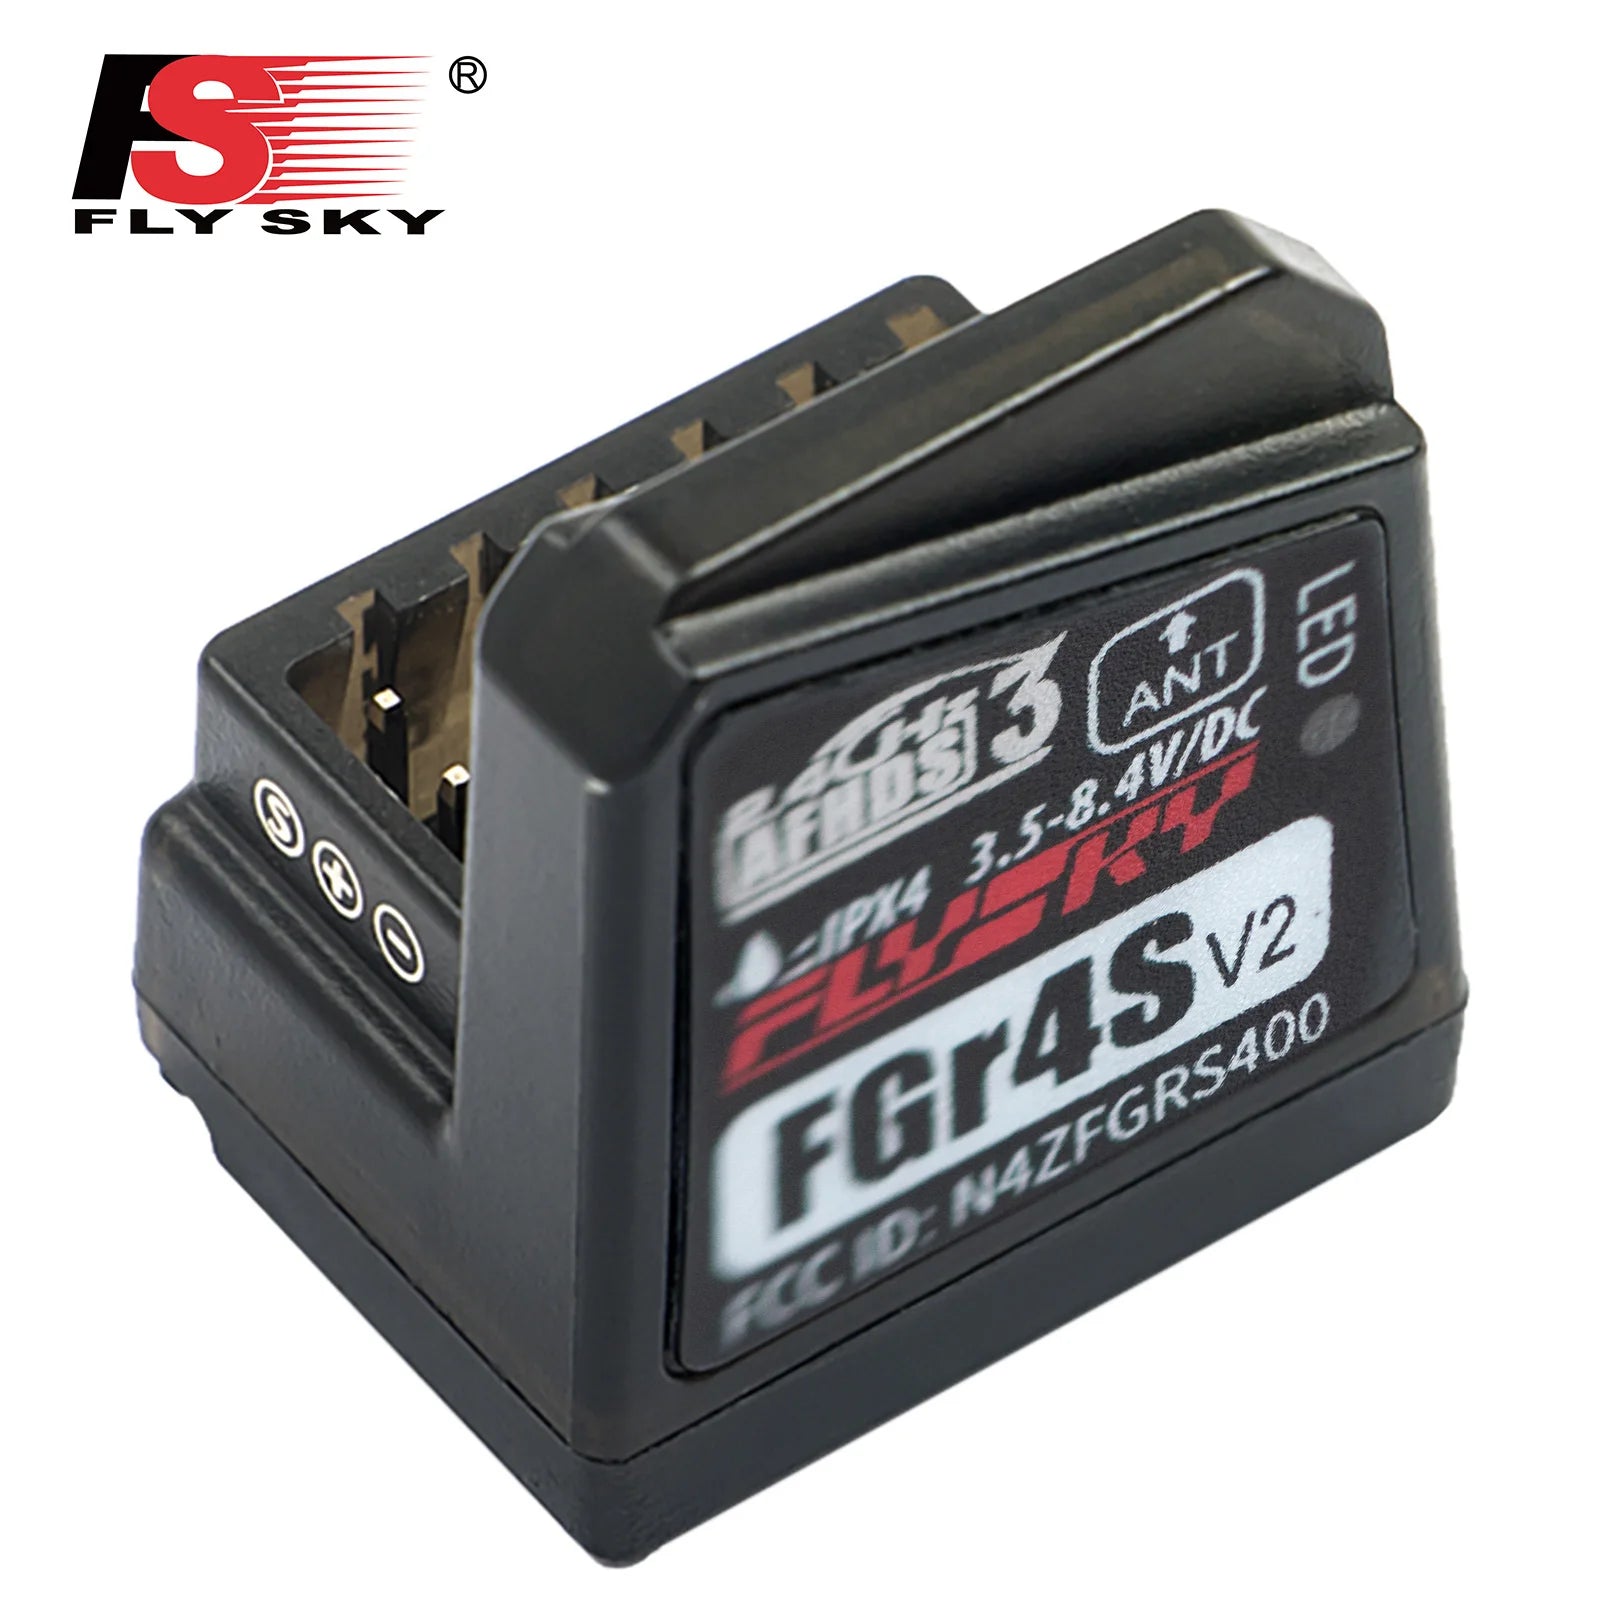 Flysky FGR4S V2 Receiver, 2.For wrongly-shipped items, Please contact us in 48 hours after delivery .